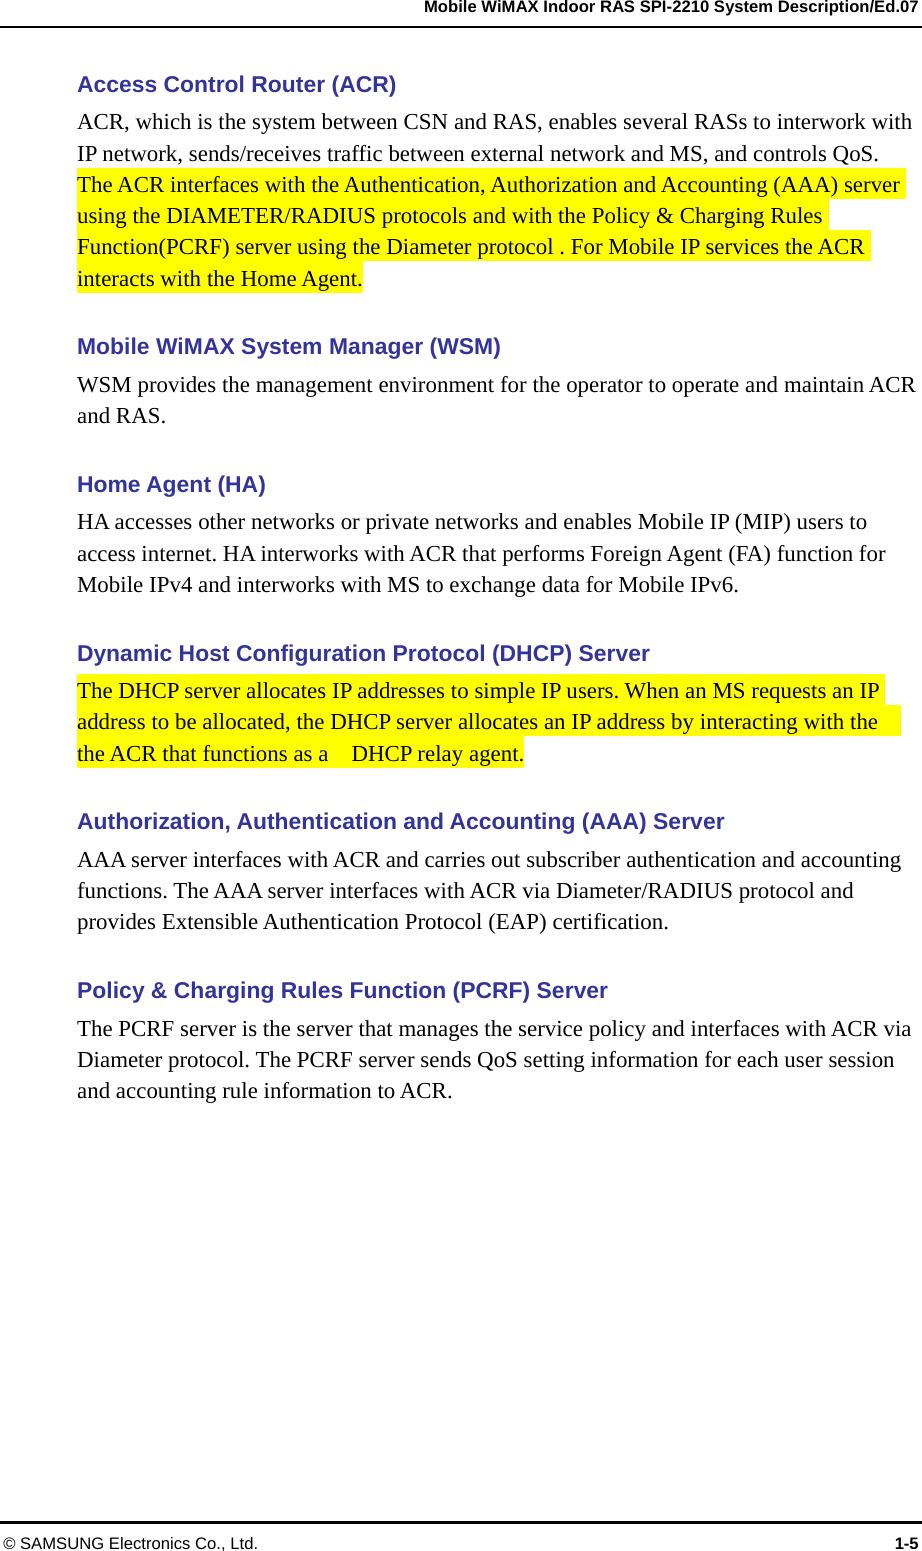   Mobile WiMAX Indoor RAS SPI-2210 System Description/Ed.07 © SAMSUNG Electronics Co., Ltd.  1-5 Access Control Router (ACR) ACR, which is the system between CSN and RAS, enables several RASs to interwork with IP network, sends/receives traffic between external network and MS, and controls QoS.   The ACR interfaces with the Authentication, Authorization and Accounting (AAA) server using the DIAMETER/RADIUS protocols and with the Policy &amp; Charging Rules Function(PCRF) server using the Diameter protocol . For Mobile IP services the ACR interacts with the Home Agent.    Mobile WiMAX System Manager (WSM) WSM provides the management environment for the operator to operate and maintain ACR and RAS.  Home Agent (HA) HA accesses other networks or private networks and enables Mobile IP (MIP) users to access internet. HA interworks with ACR that performs Foreign Agent (FA) function for Mobile IPv4 and interworks with MS to exchange data for Mobile IPv6.  Dynamic Host Configuration Protocol (DHCP) Server The DHCP server allocates IP addresses to simple IP users. When an MS requests an IP address to be allocated, the DHCP server allocates an IP address by interacting with the   the ACR that functions as a    DHCP relay agent.  Authorization, Authentication and Accounting (AAA) Server AAA server interfaces with ACR and carries out subscriber authentication and accounting functions. The AAA server interfaces with ACR via Diameter/RADIUS protocol and provides Extensible Authentication Protocol (EAP) certification.  Policy &amp; Charging Rules Function (PCRF) Server The PCRF server is the server that manages the service policy and interfaces with ACR via Diameter protocol. The PCRF server sends QoS setting information for each user session and accounting rule information to ACR.  